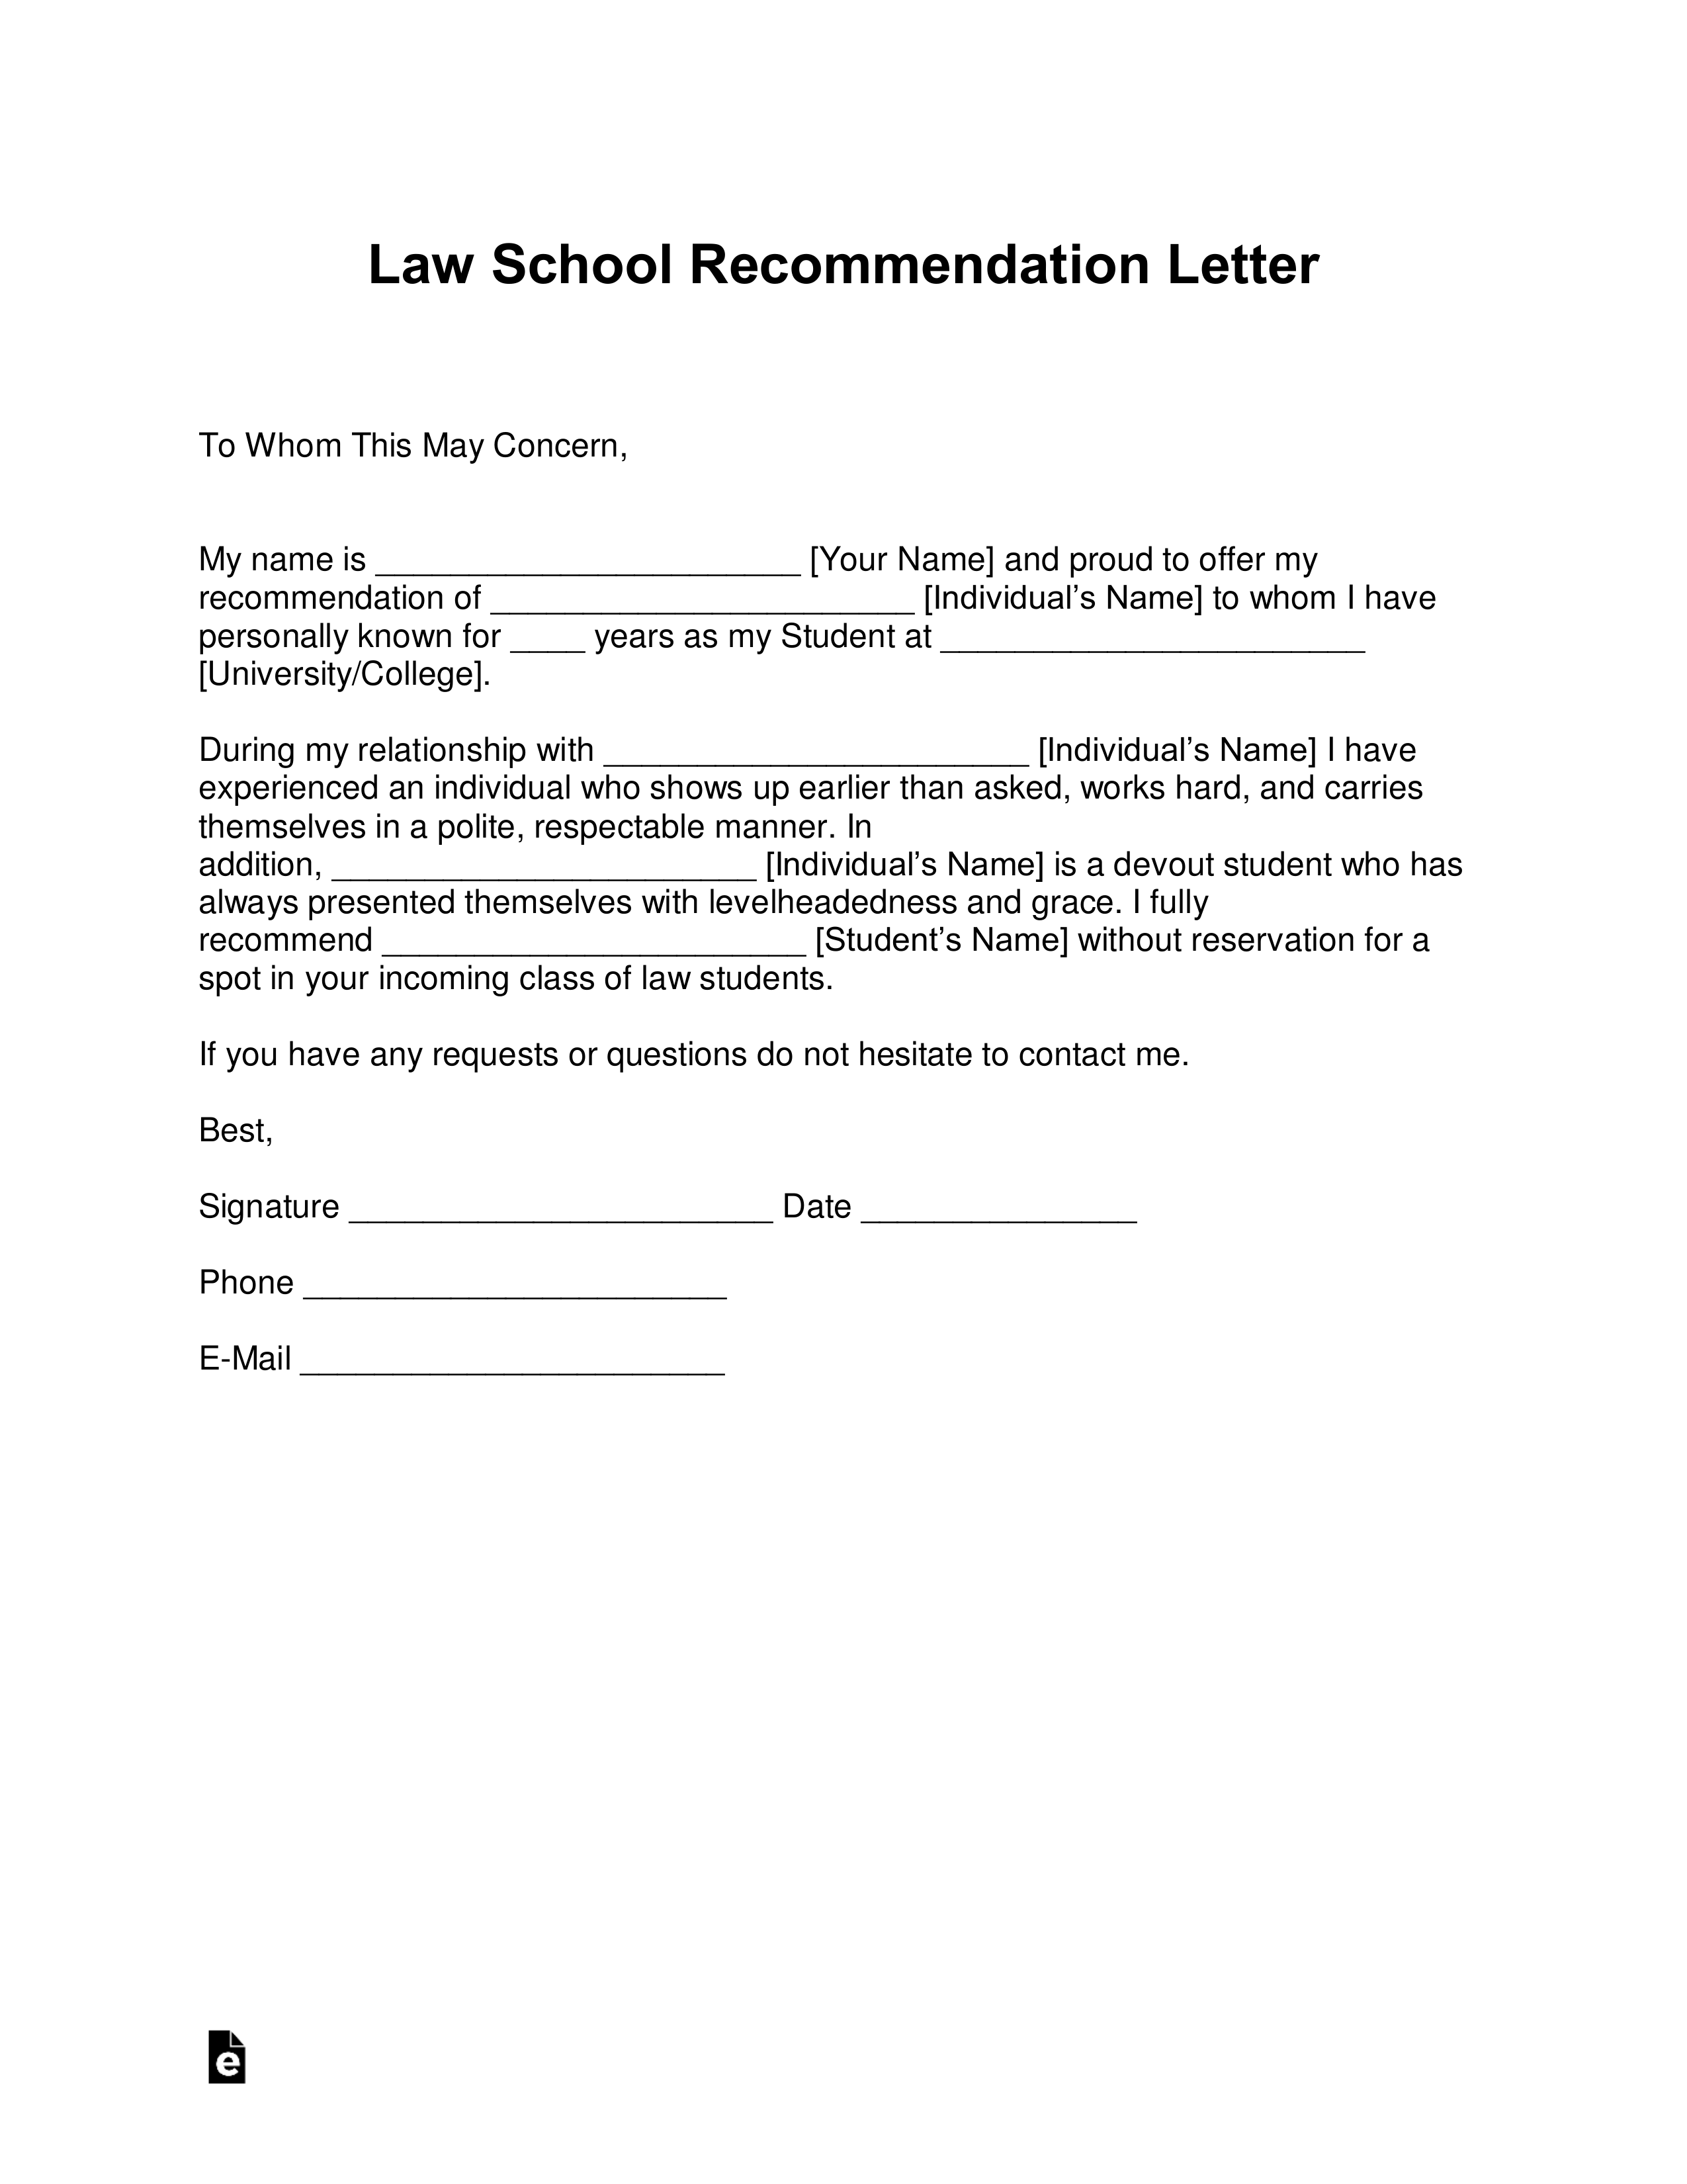 Letter Of Recommendation Samples For Students from eforms.com